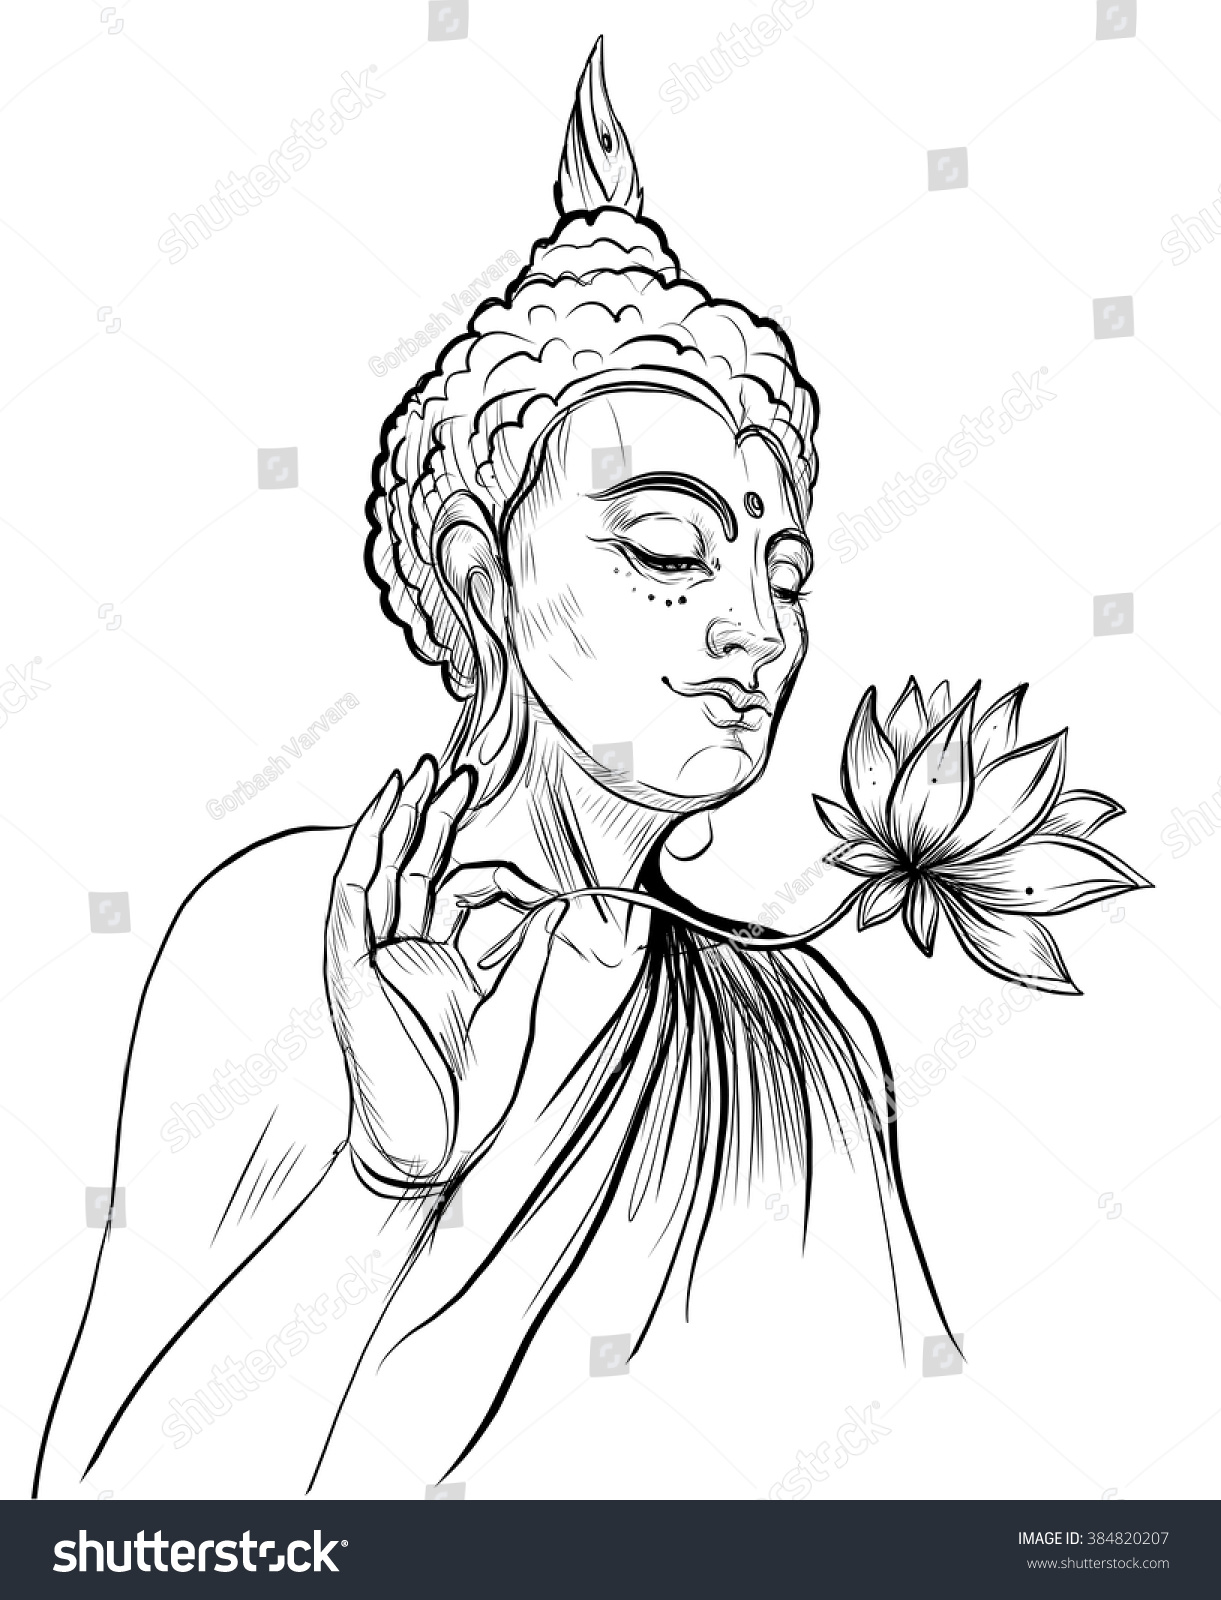 How are buddhism and hinduism similar